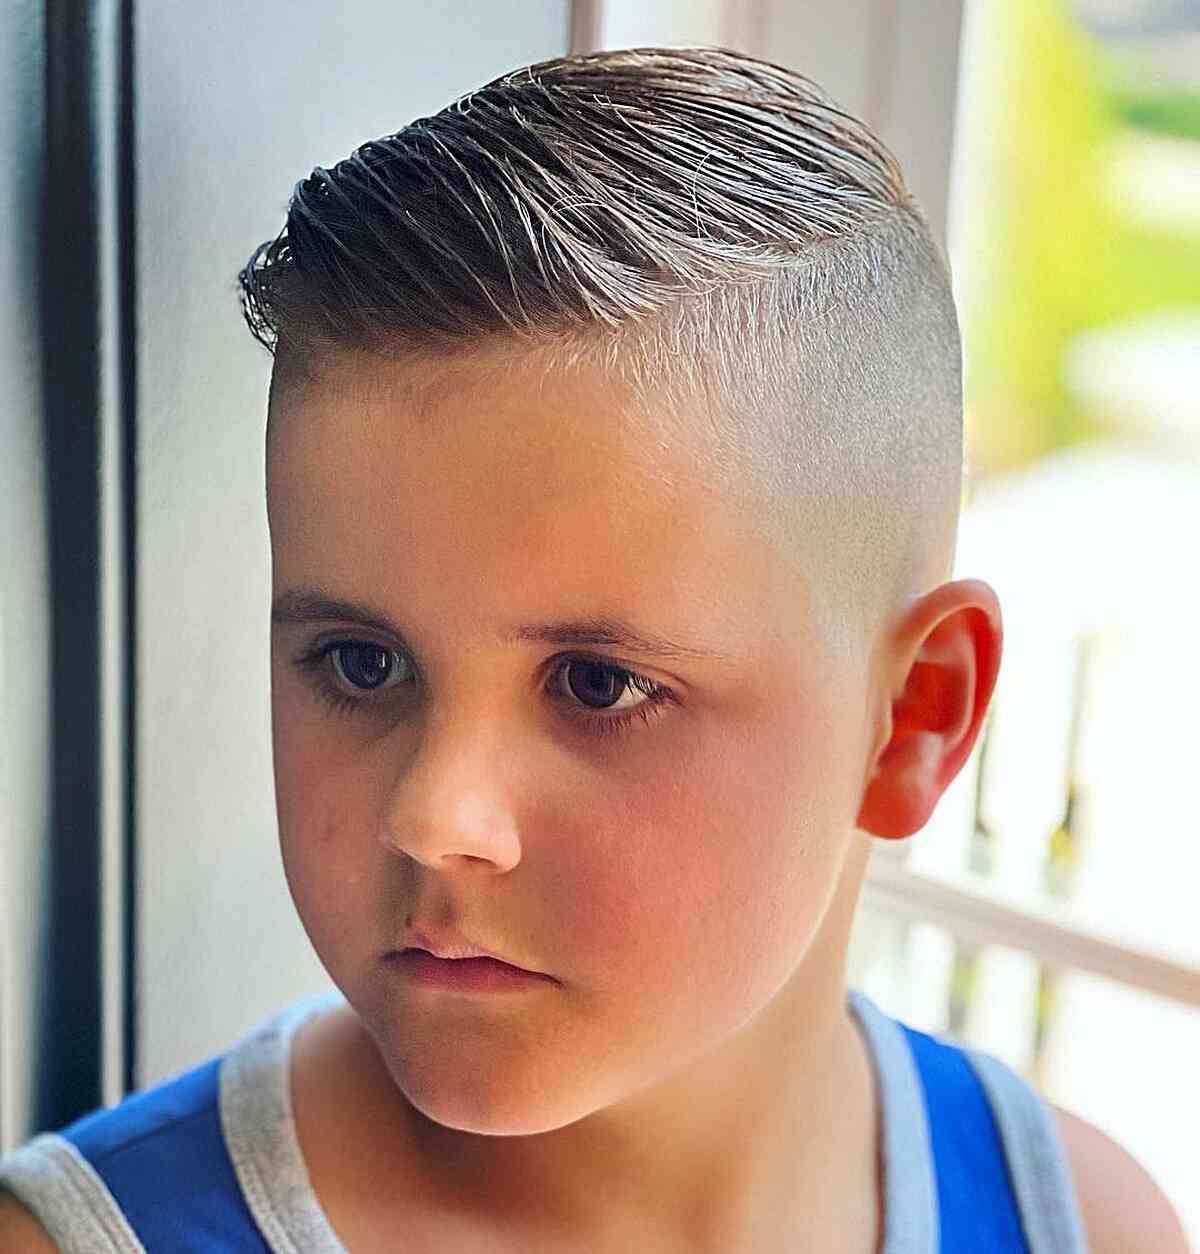 Skin Fade & Undercut for Little Boys with short hair and a sweet face